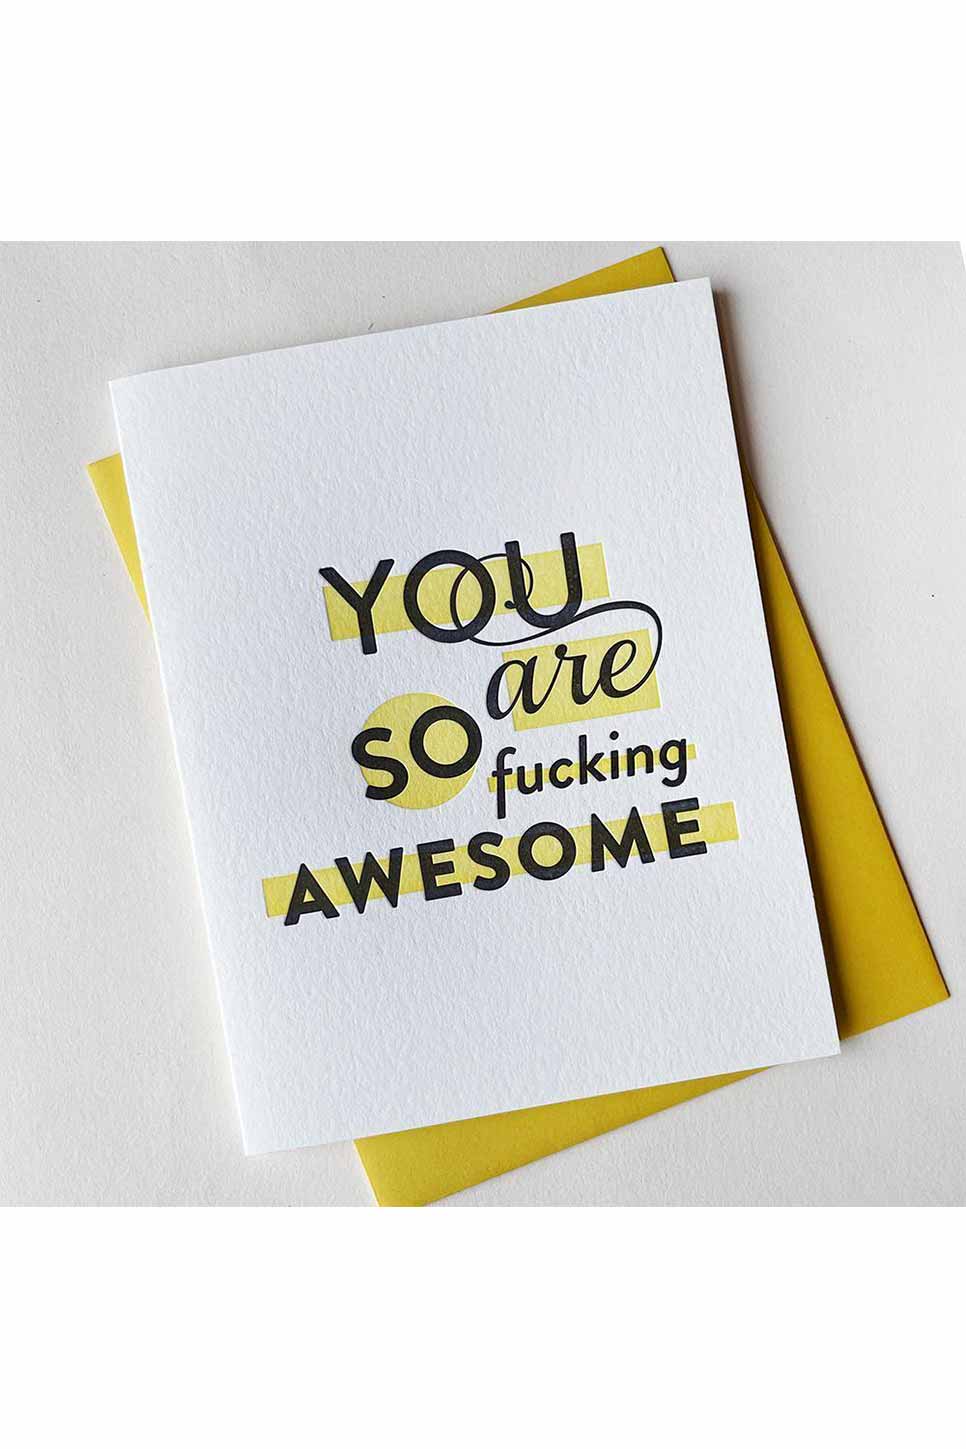 FUCKING AWESOME LOVE AND FRIENDSHIP CARD